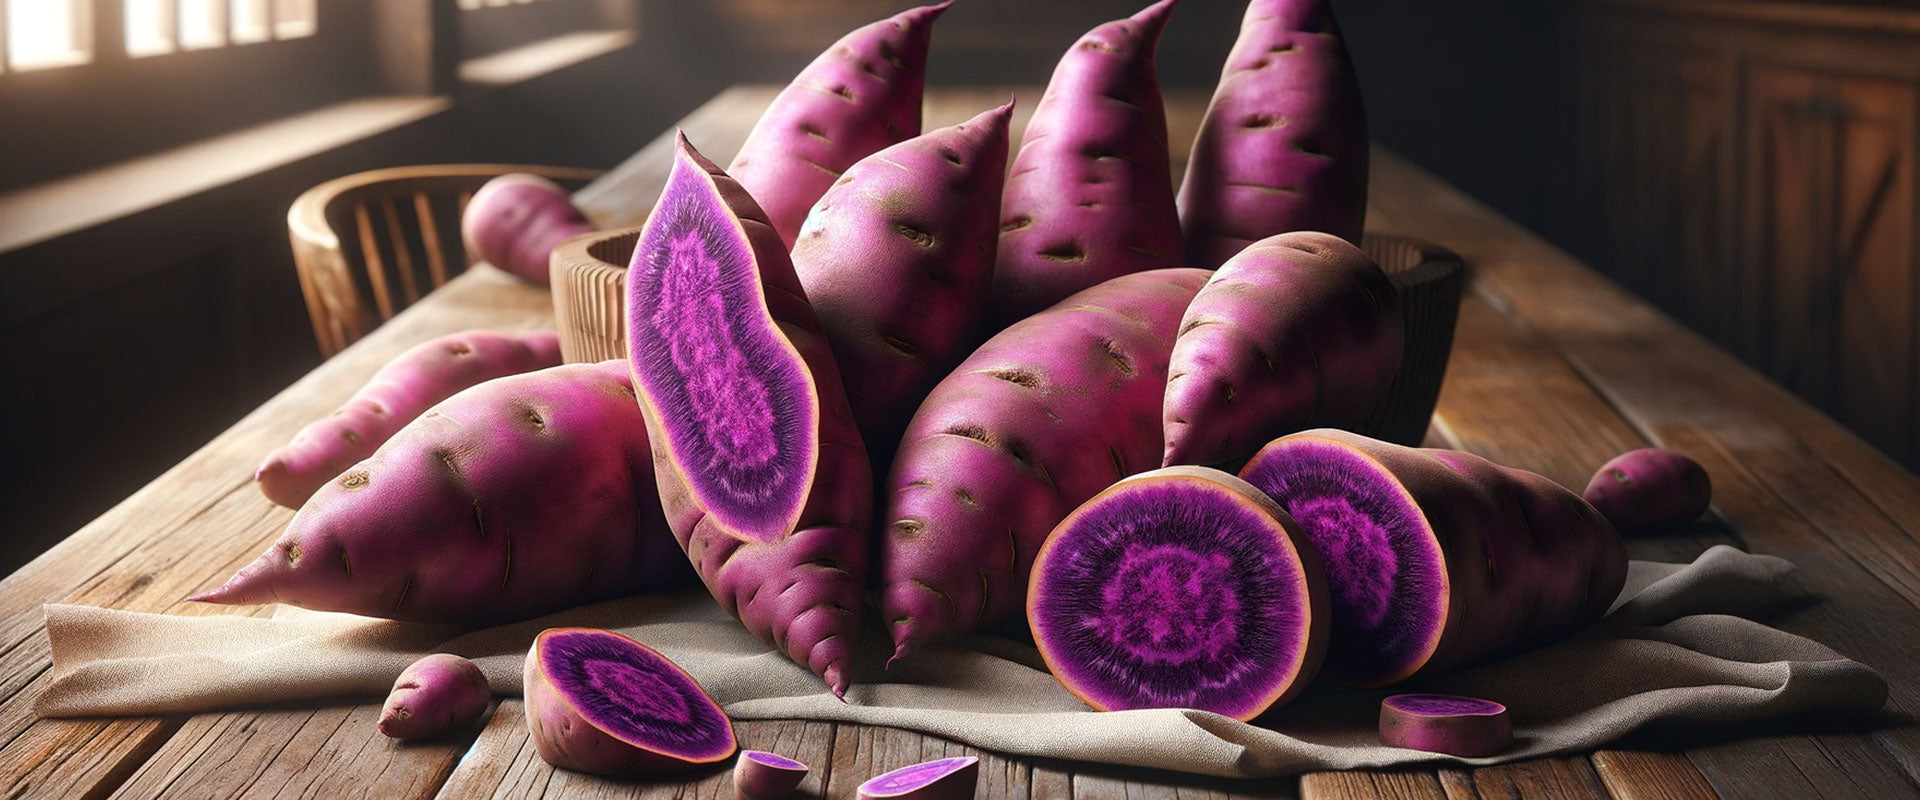 natural purple food coloring from purple sweet potatoes